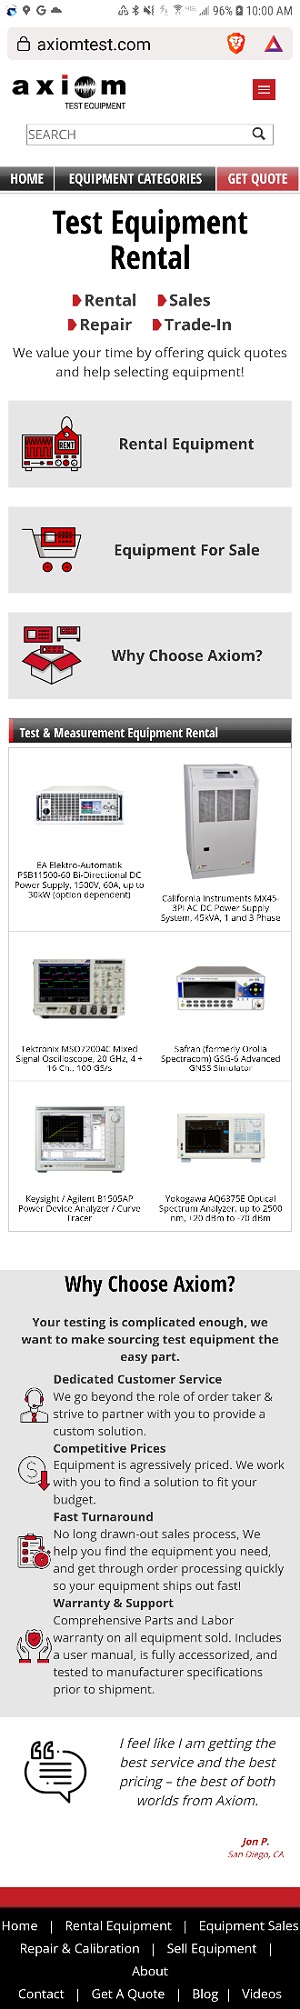 Axiom Test Equipment Launches Redesigned Mobile Website - RF Cafe